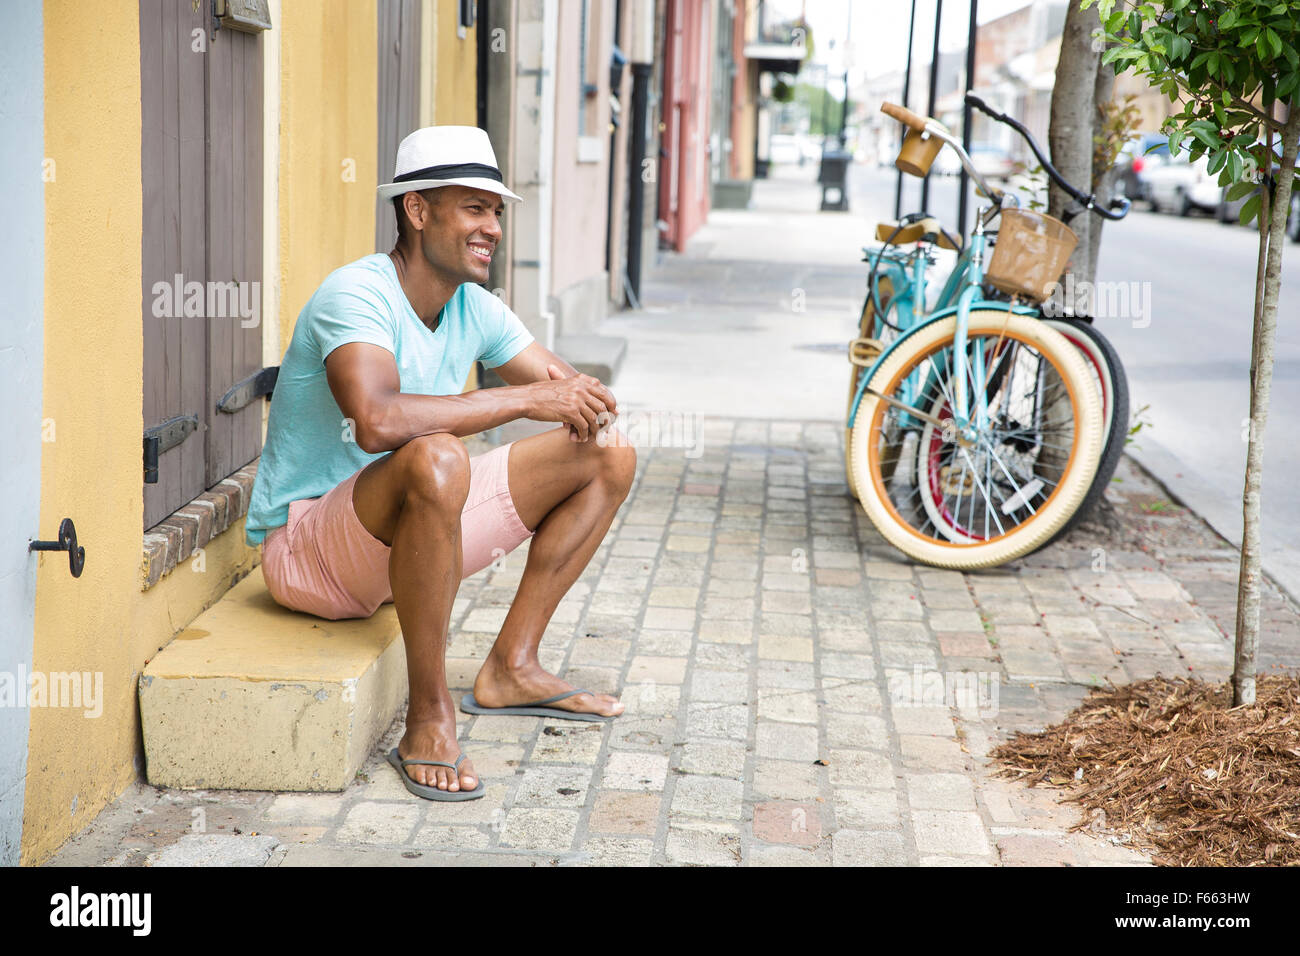 Portrait of an ethnic man smiling wearing a light blue green t-shirt and black and white fedora with a bicycle in th background. Stock Photo